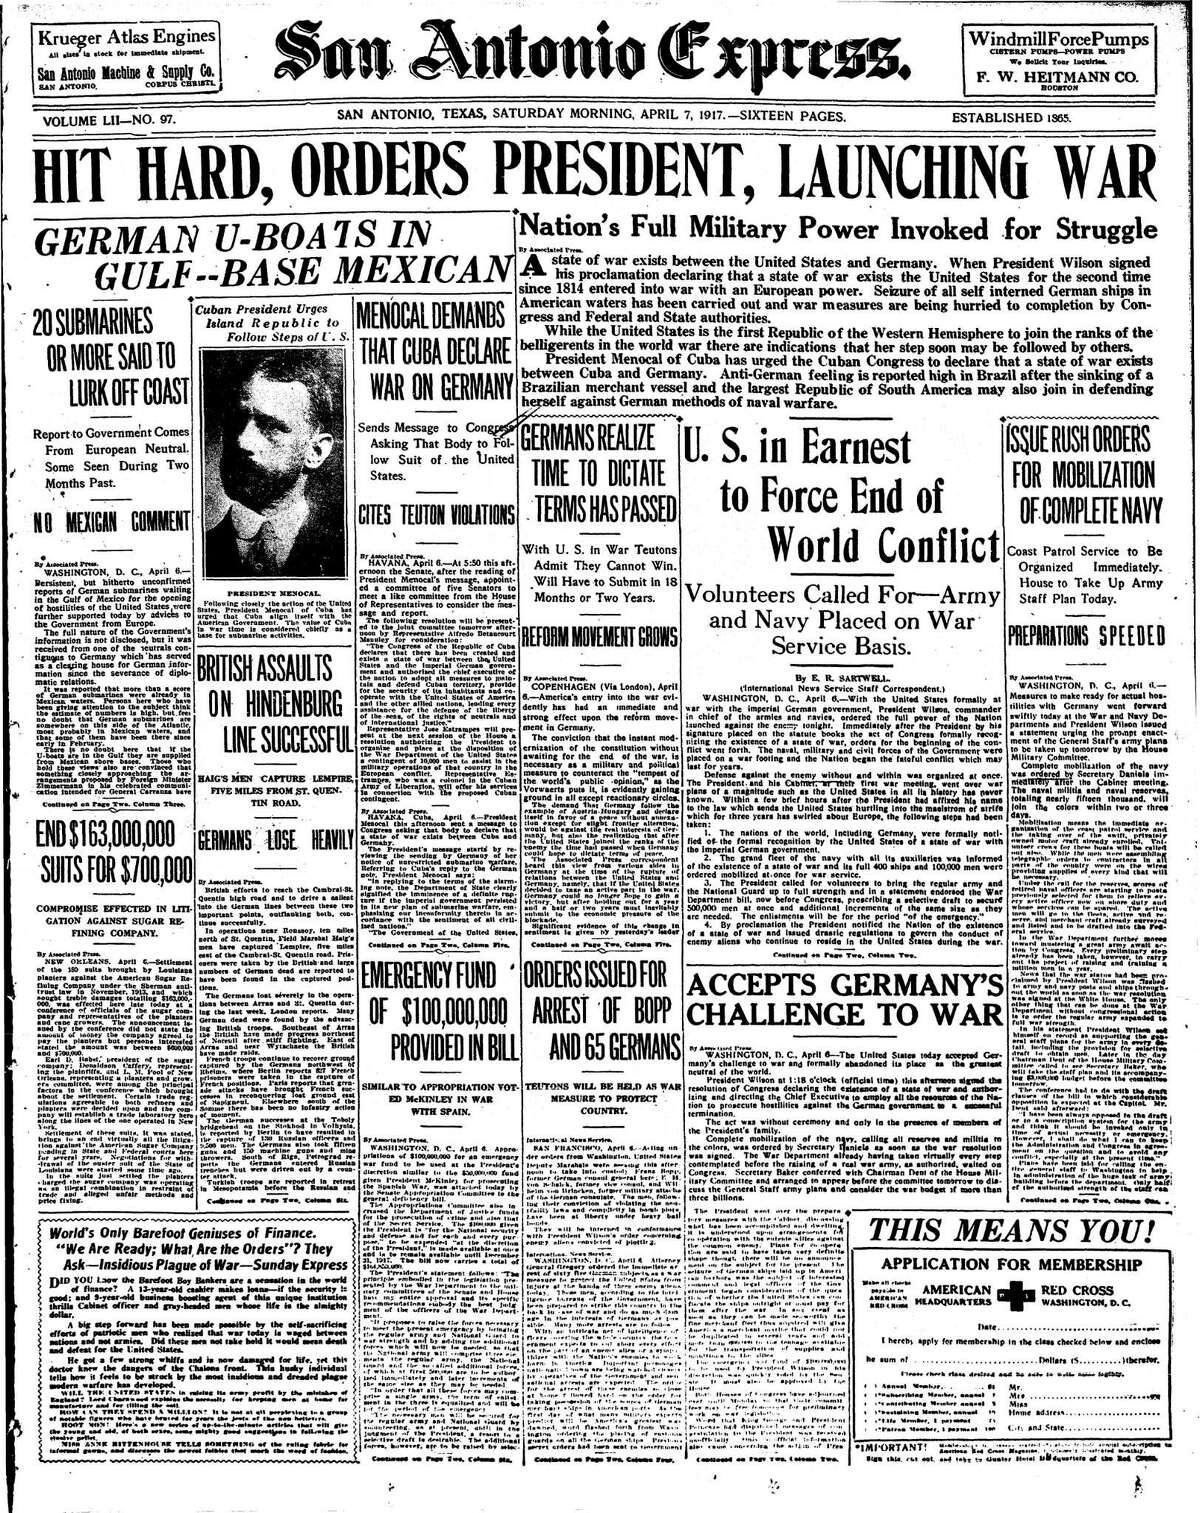 The front page of San Antonio Express April 7, 1917. "Hit hard, orders President, launching war"